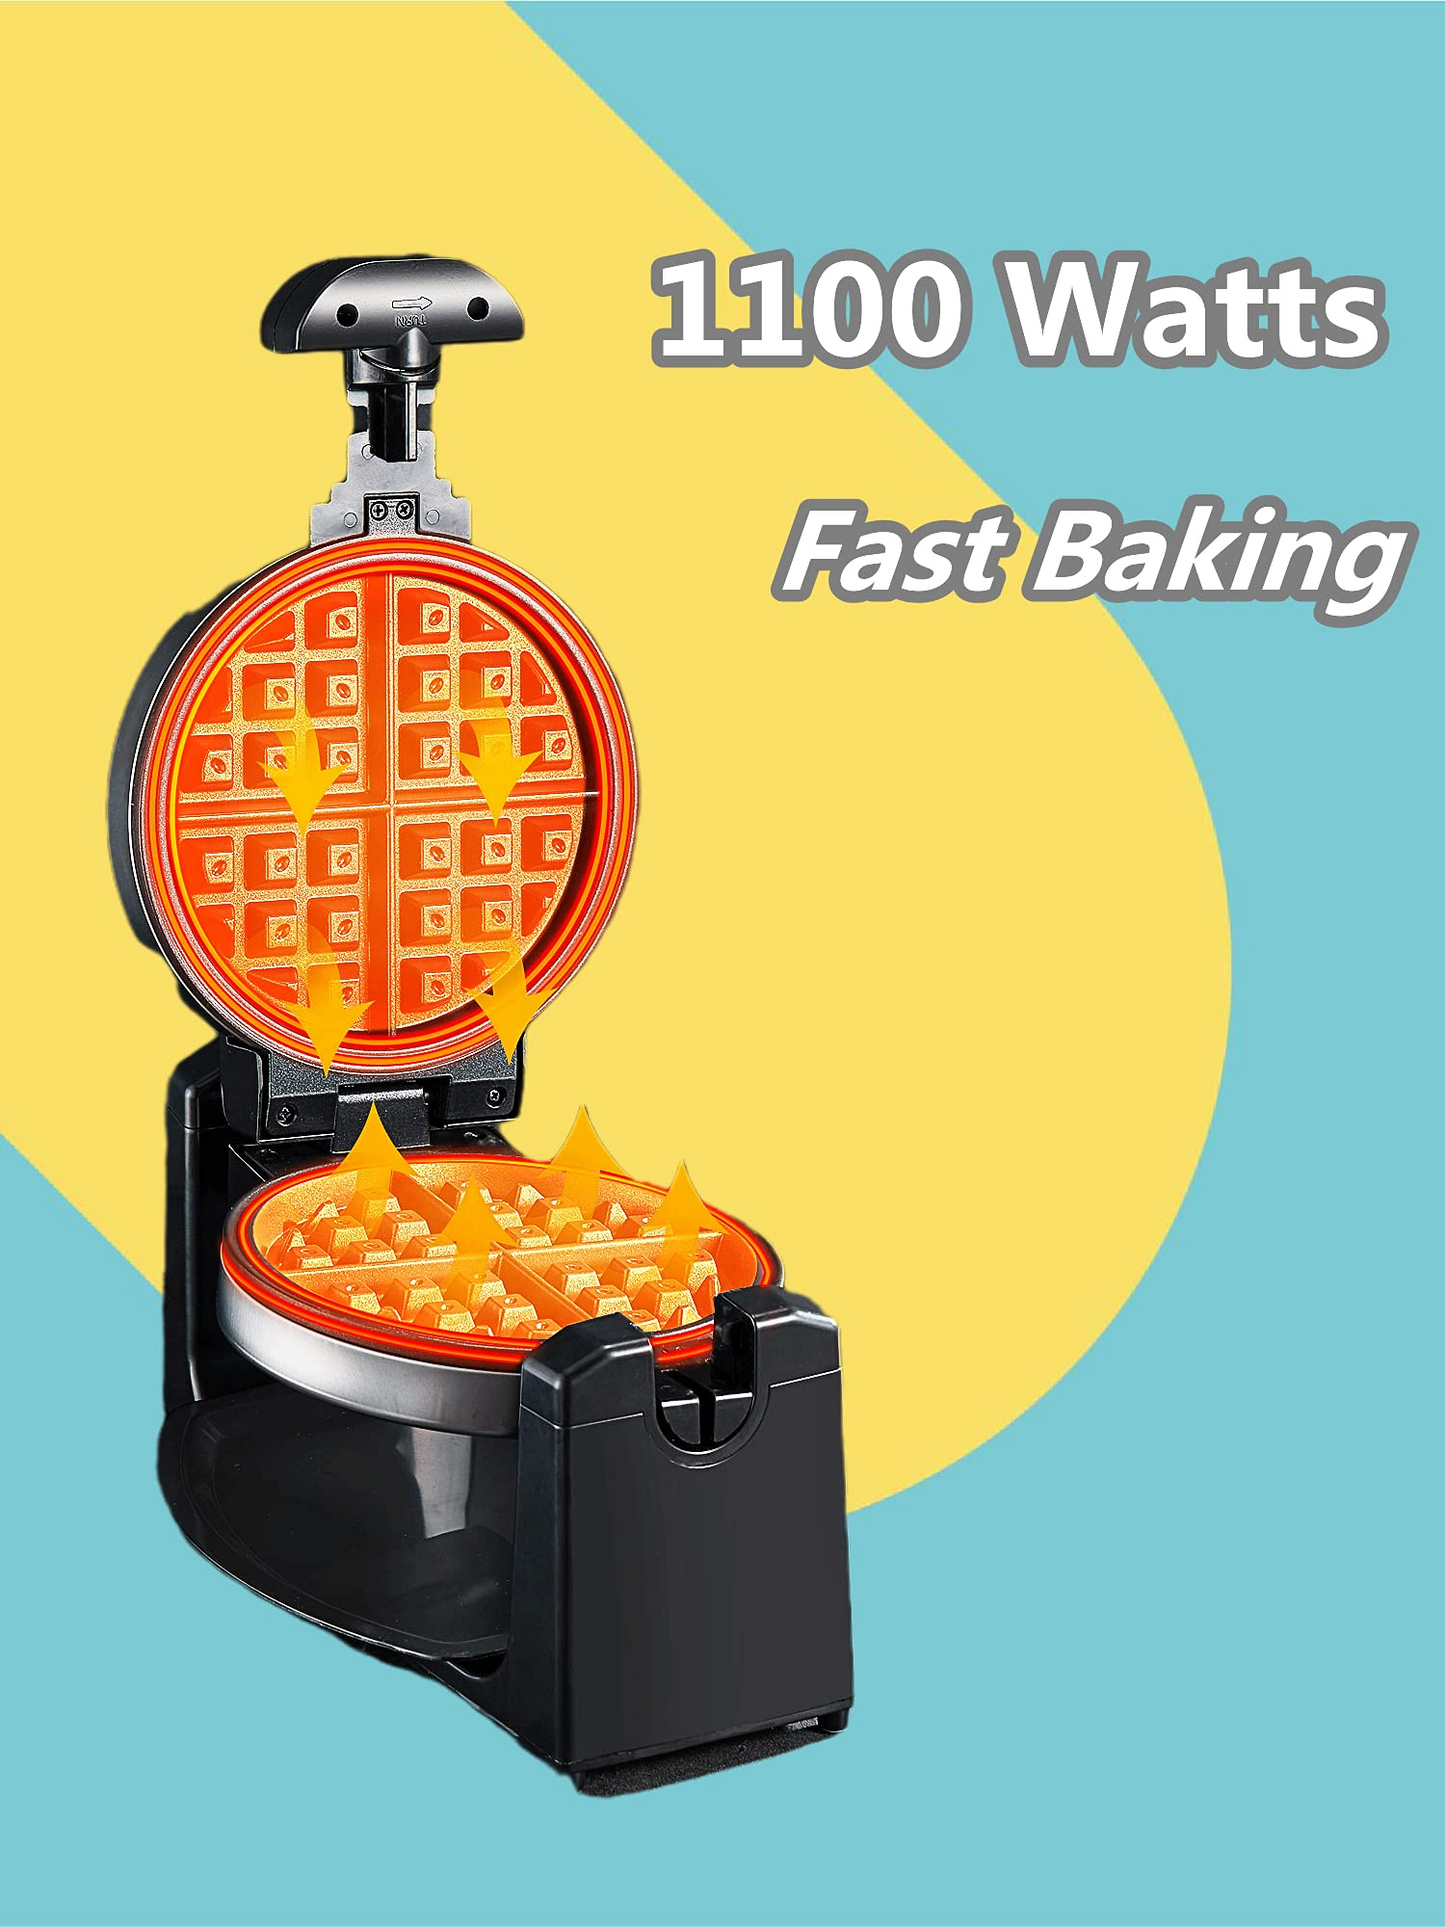 AICOOK | Classic Rotating NonStick Belgian Waffle Maker, 1100W Browning Control, Removeable Drip Tray for Easy Clean Up, Browning Control, Stainless Steel